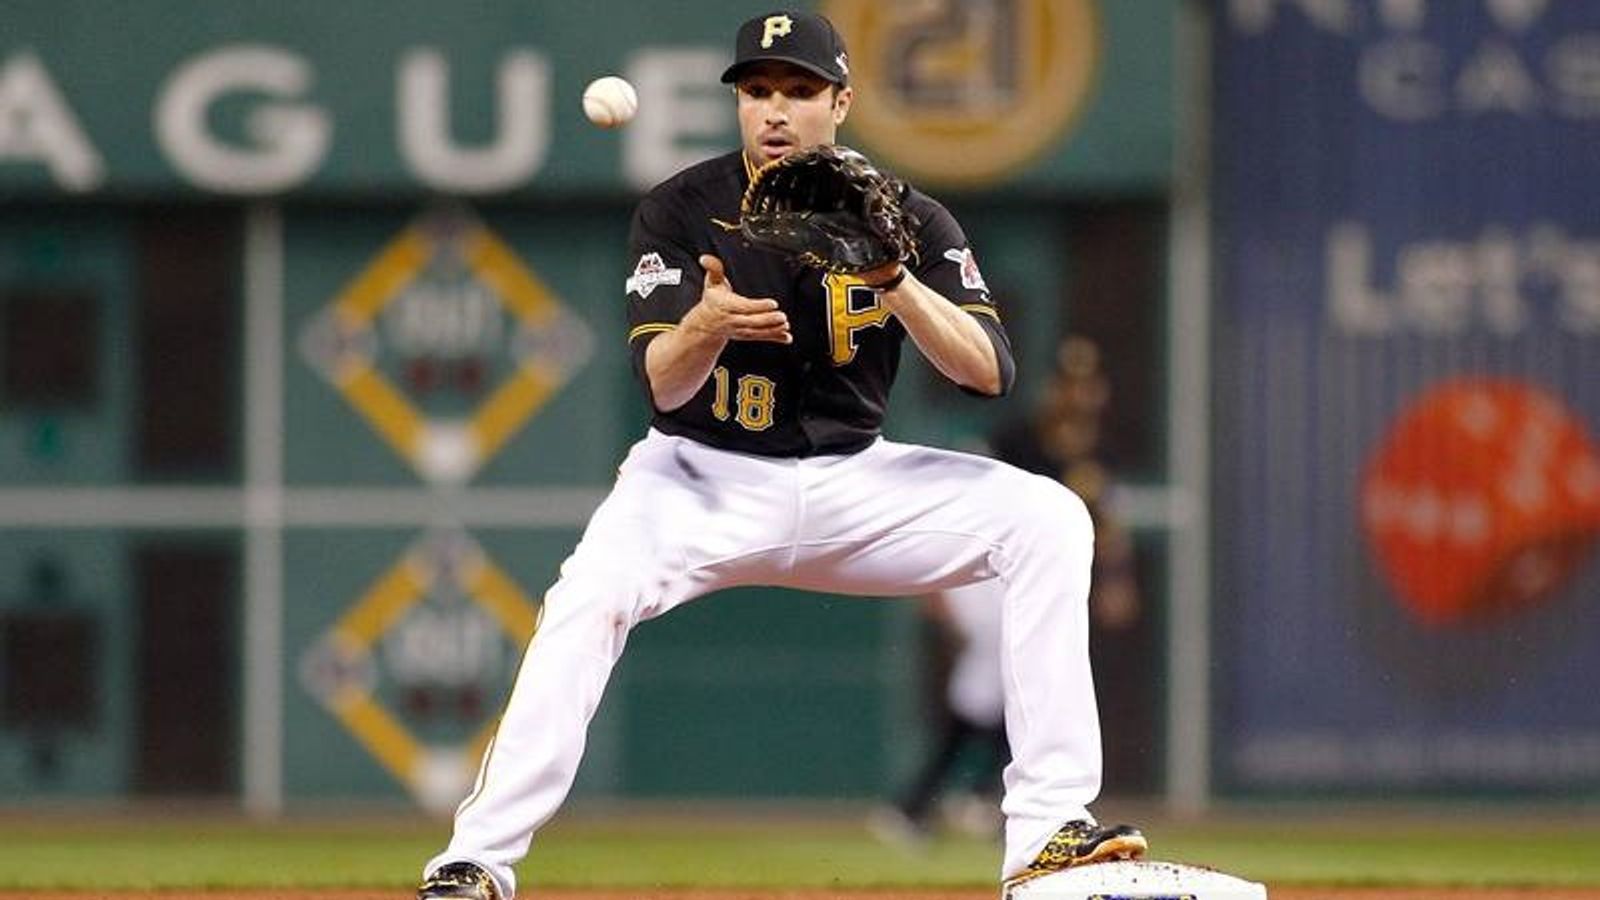 I got to live out my dream:' Neil Walker discusses decision to